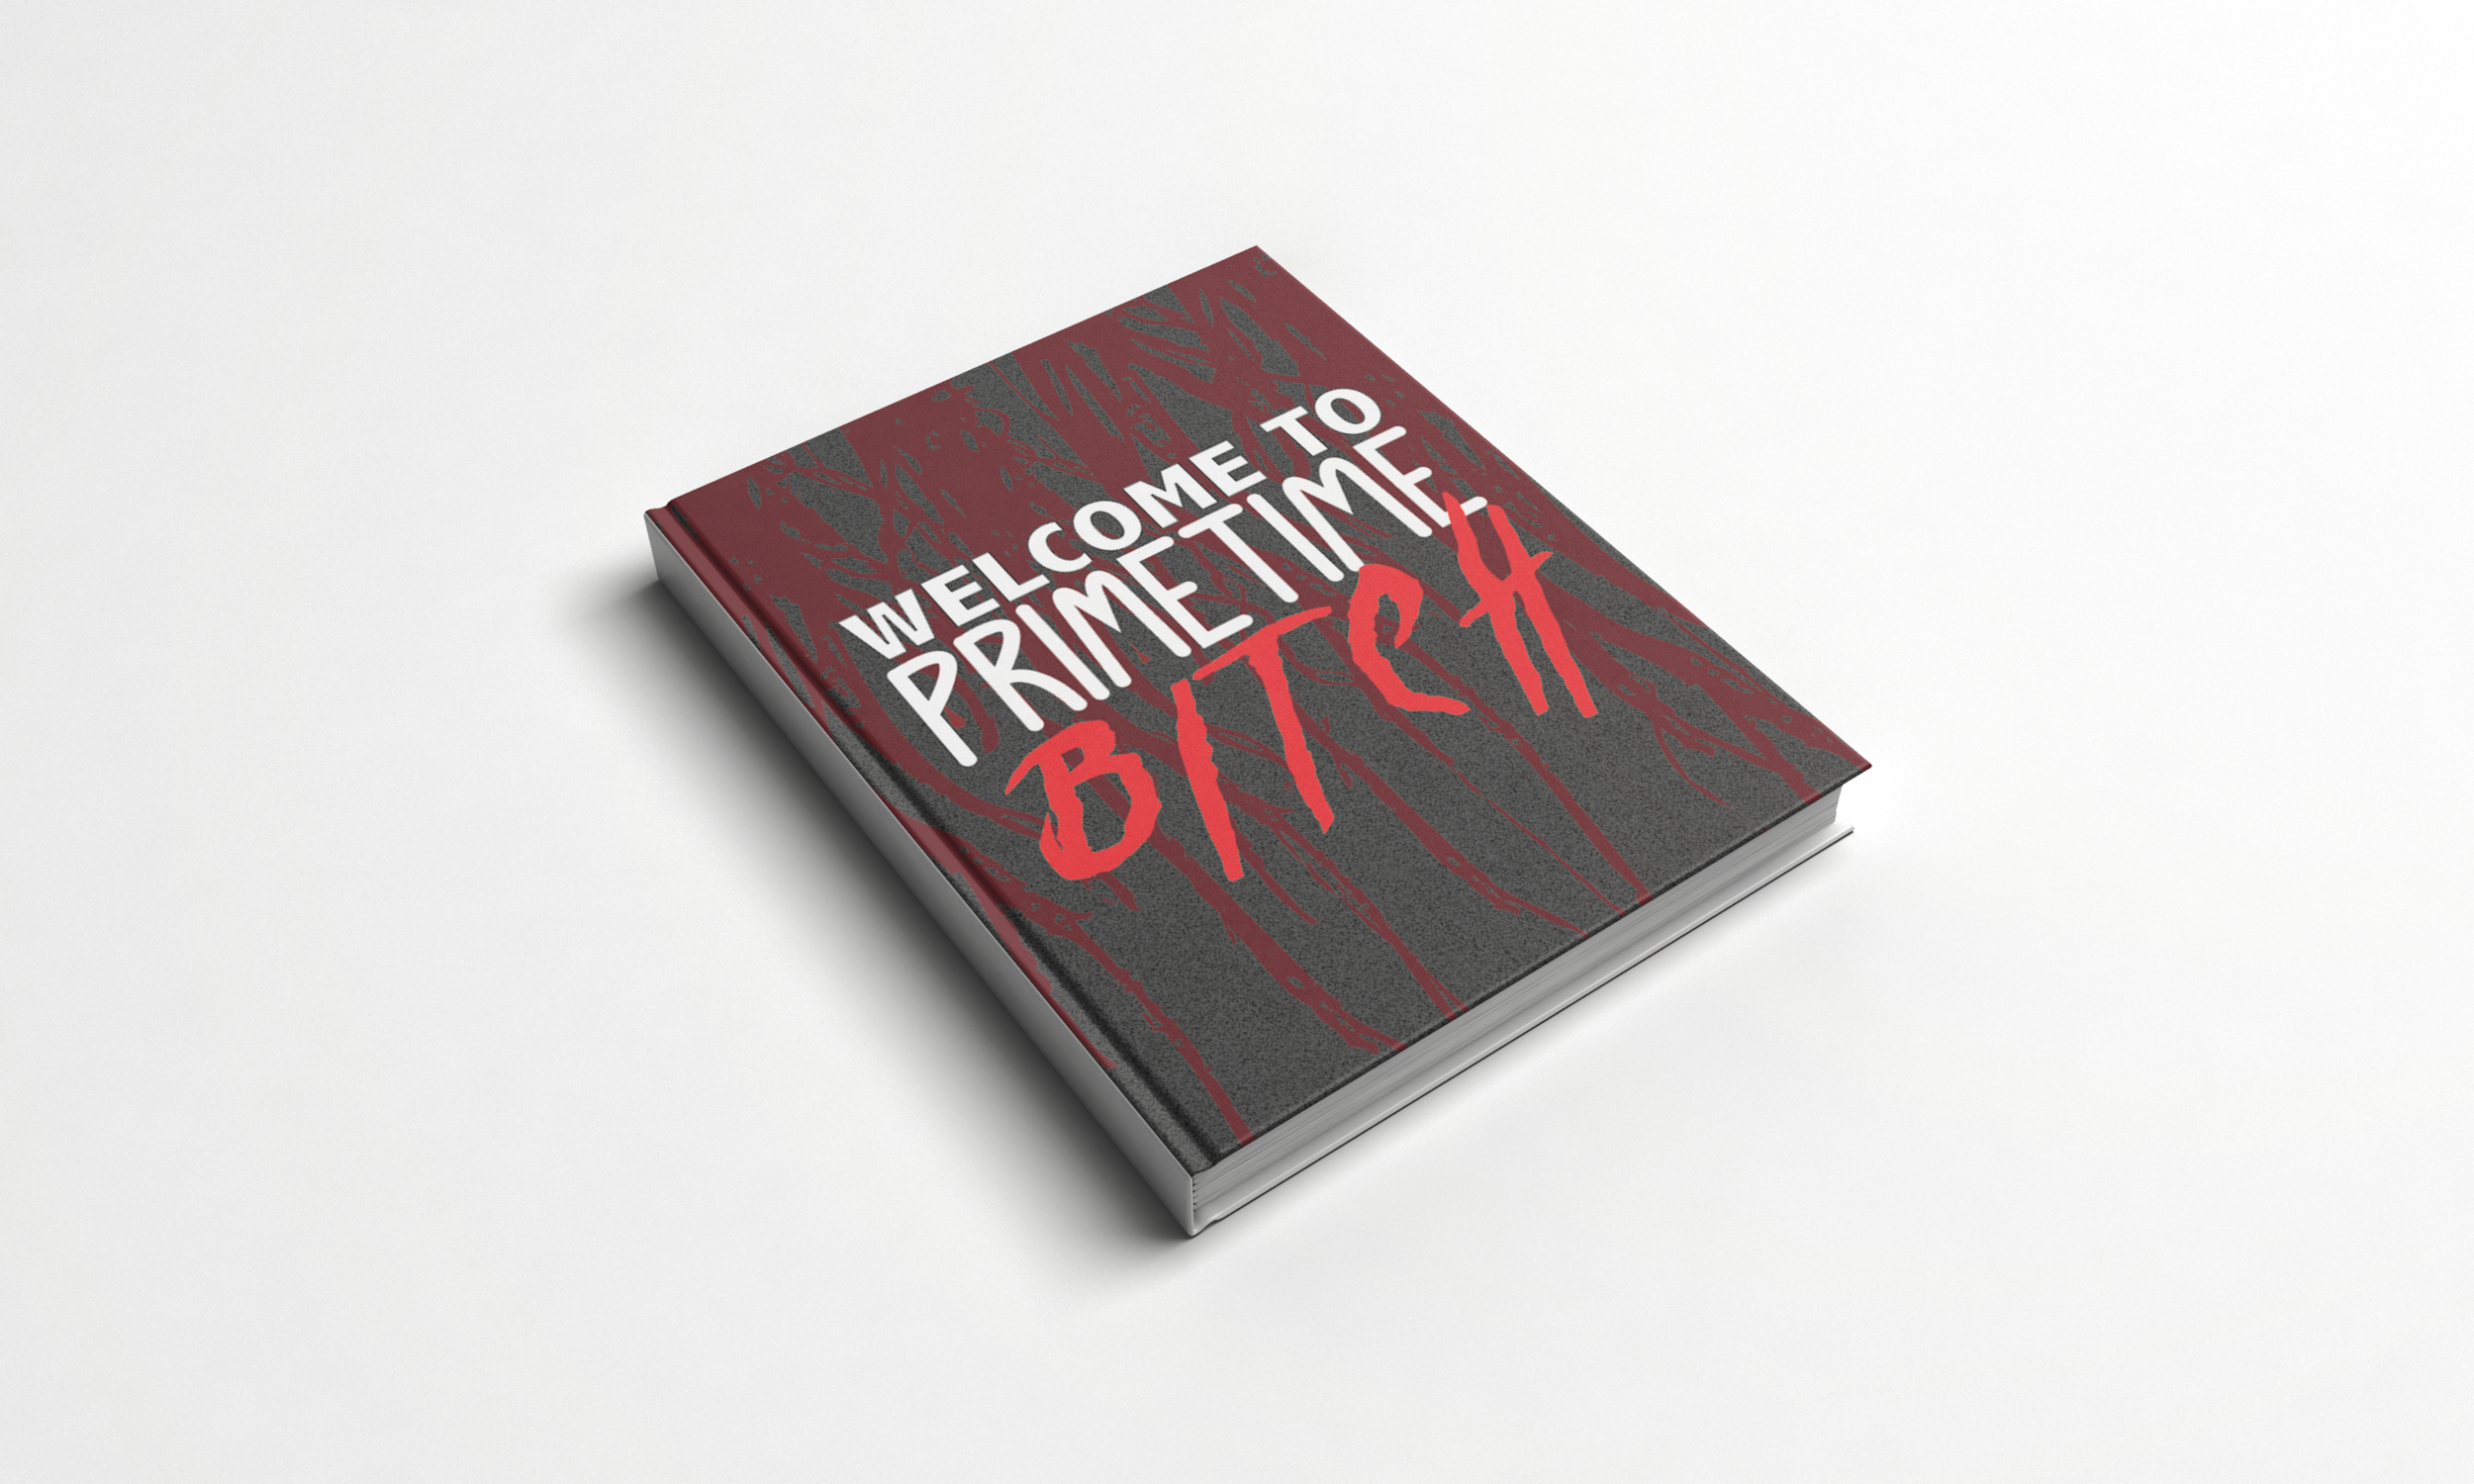   WELCOME TO PRIMETIME BITCH    FAUX PUBLISHED HORROR MOVIE THEMED BOOK  